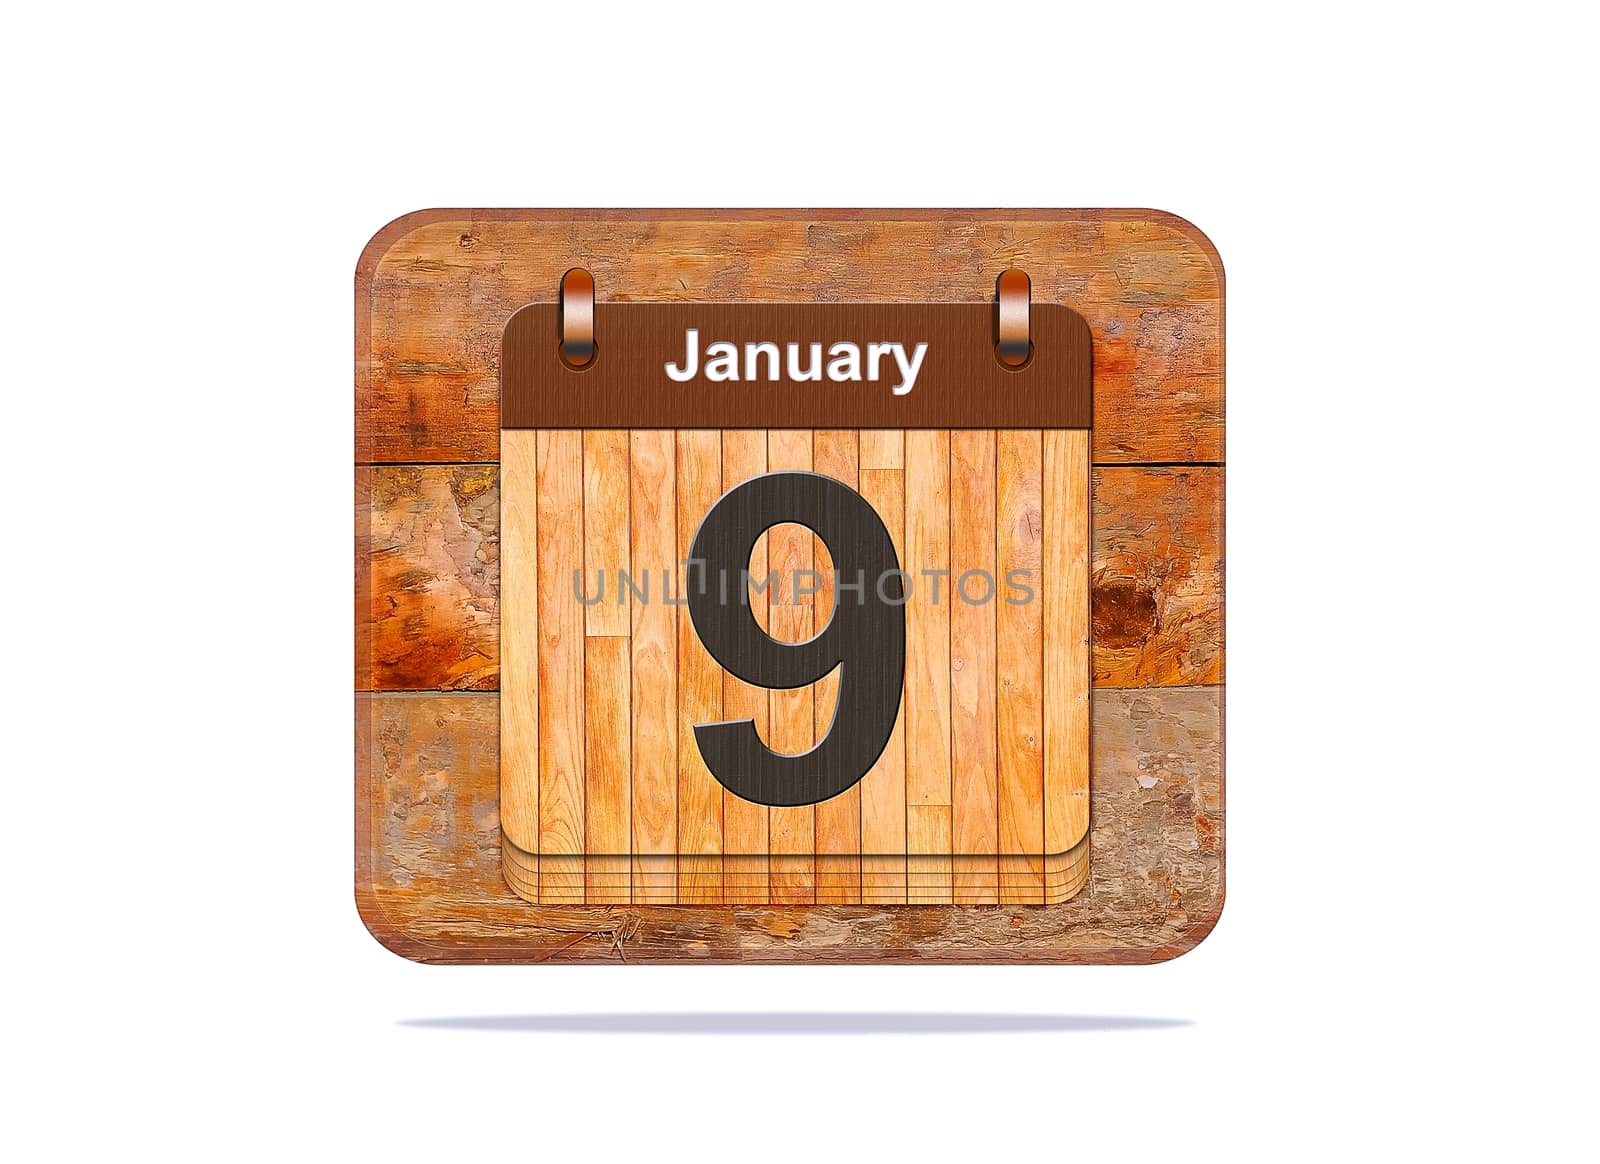 Calendar with the date of January 9.